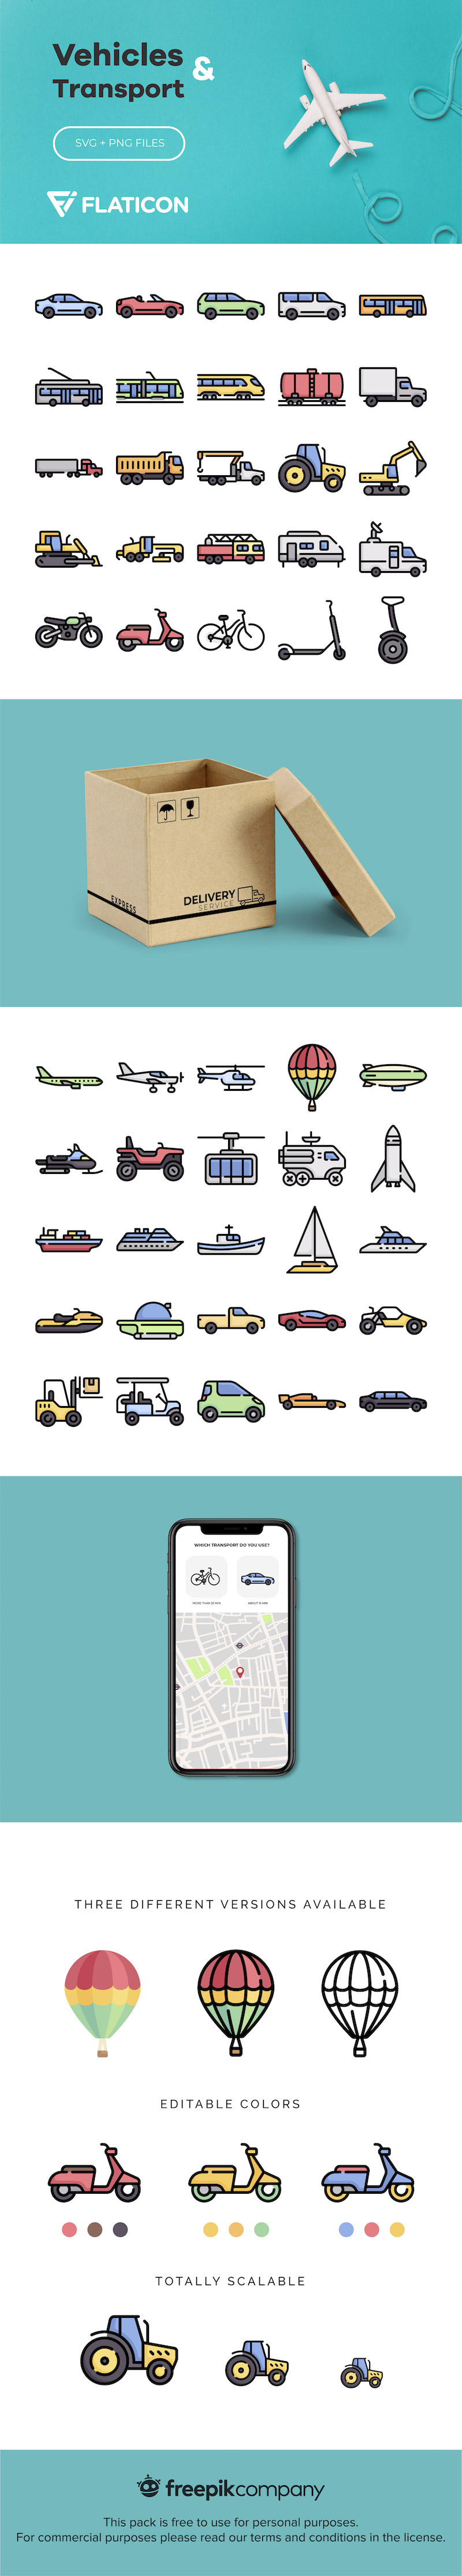 Download 50 Free Vehicle And Transport Icons Svg Png Super Dev Resources